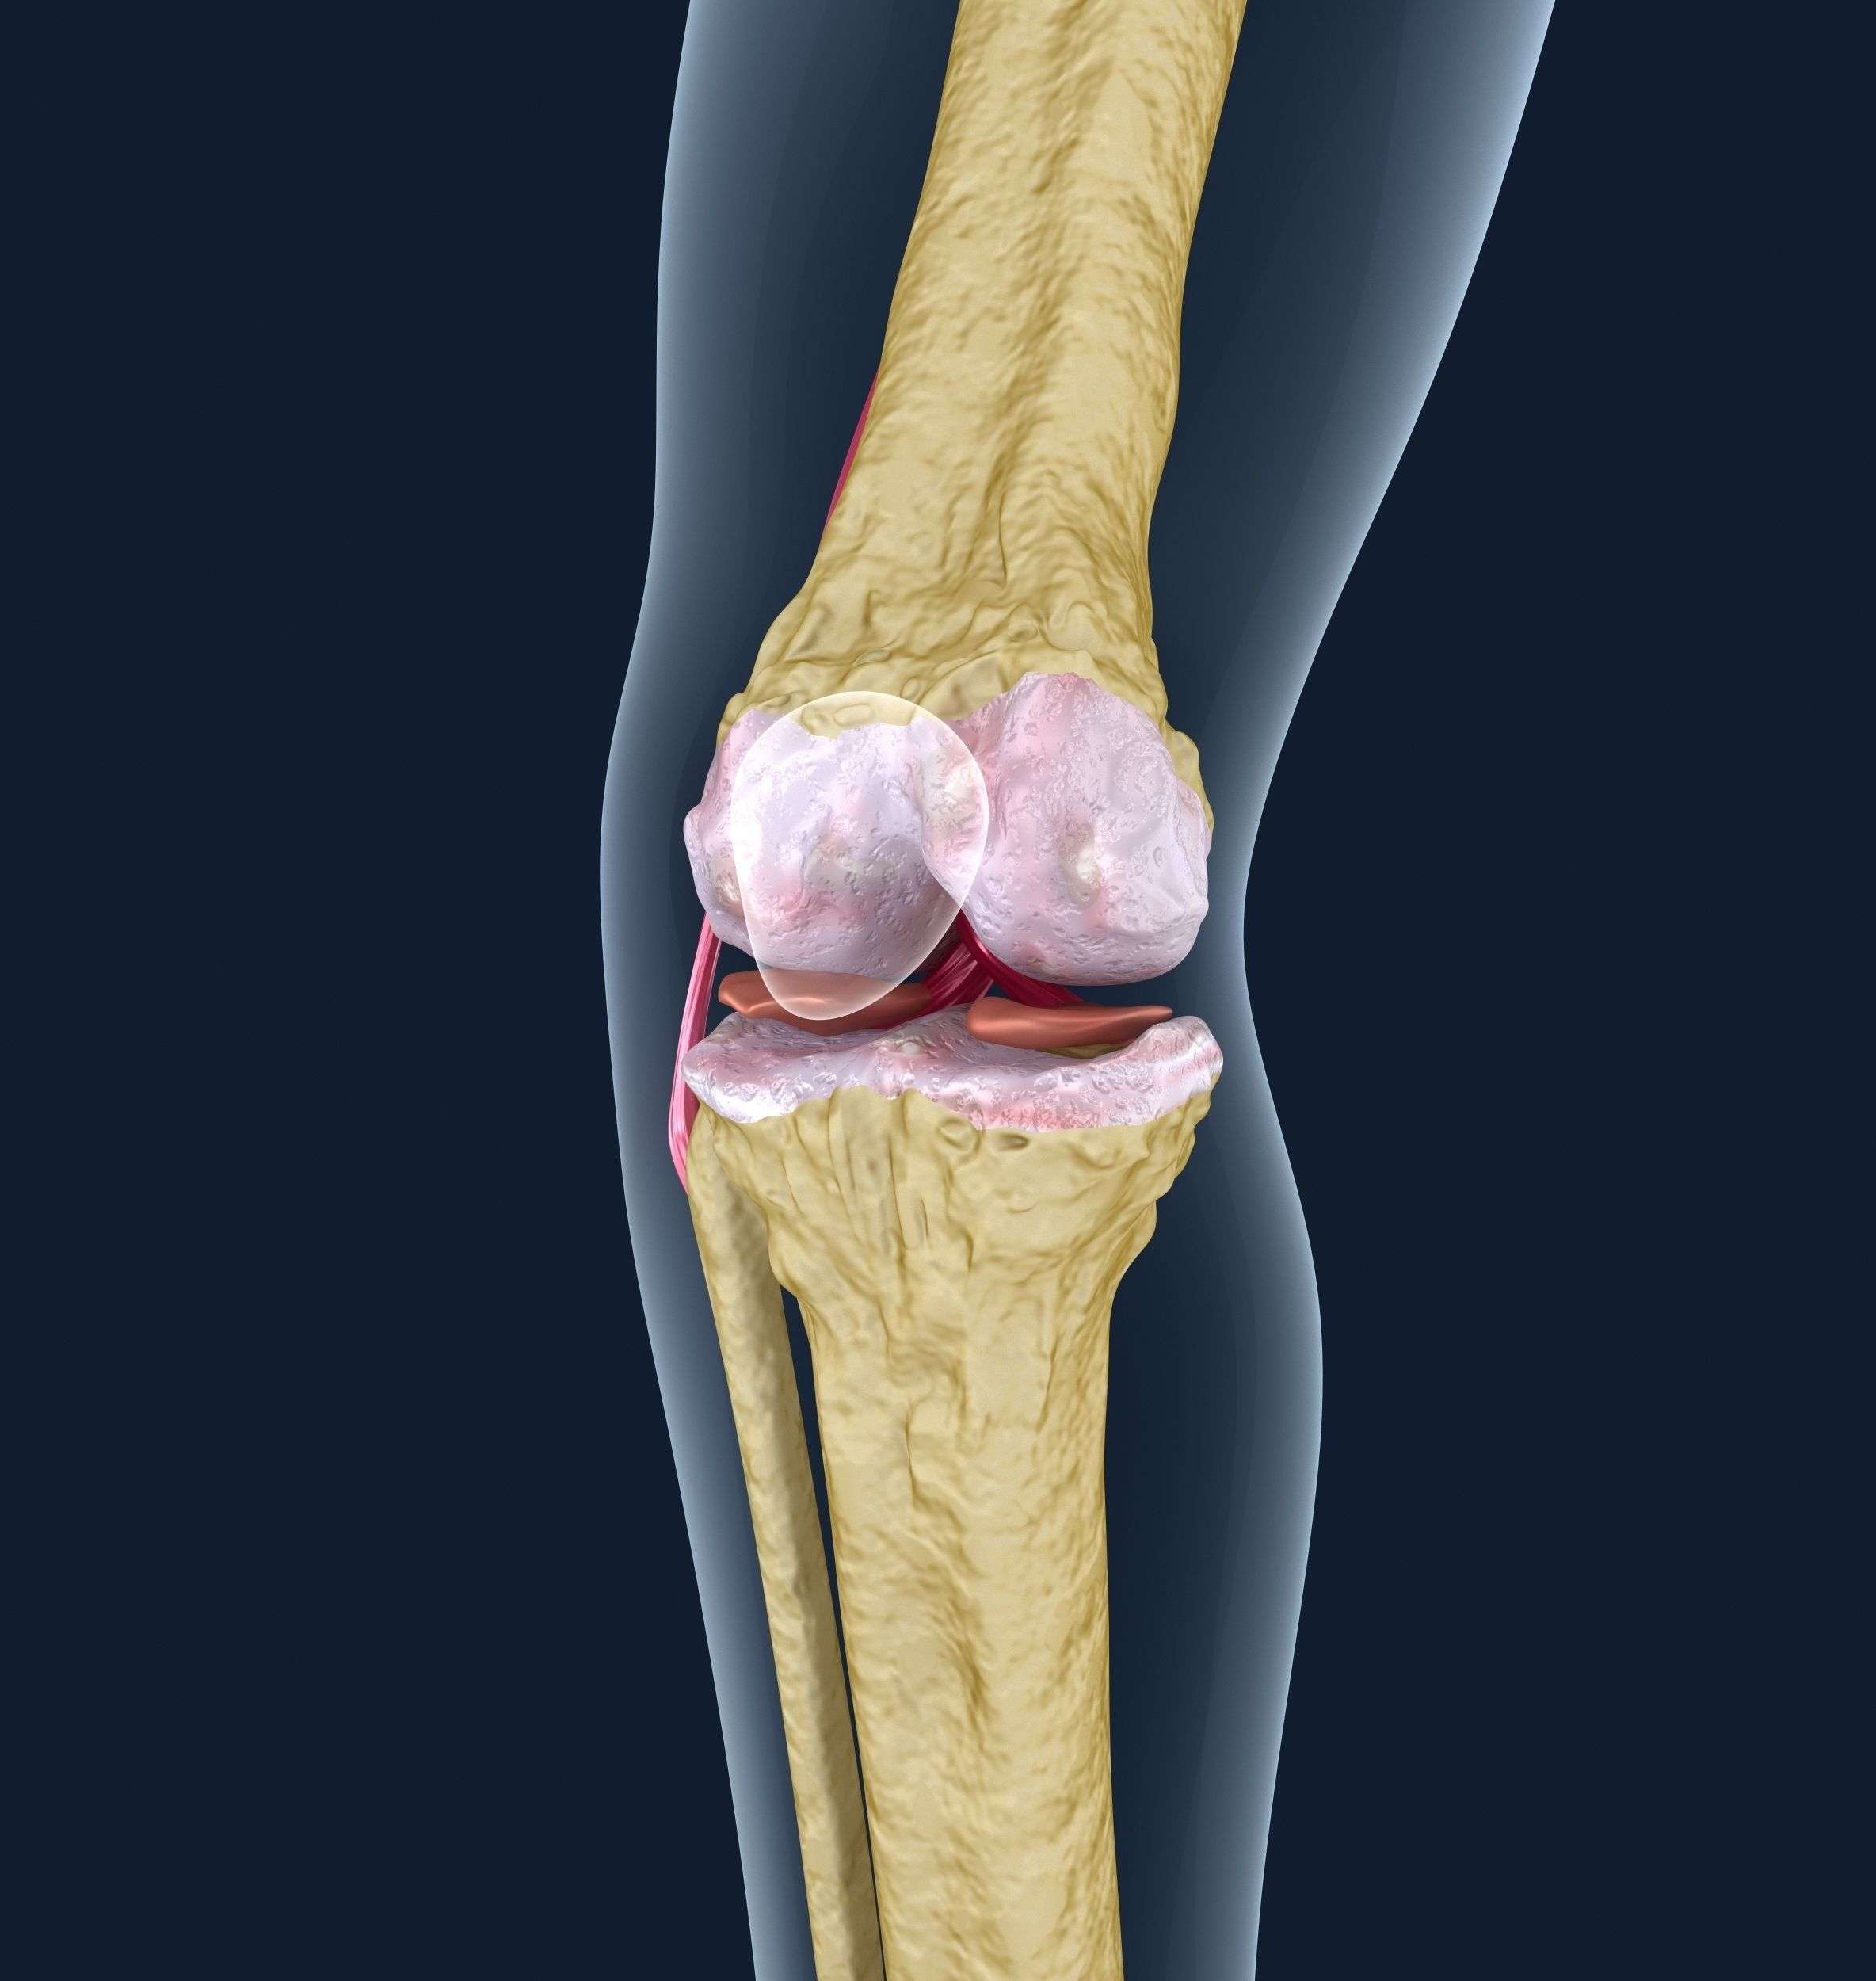 3D Osteoporosis of the knee joint